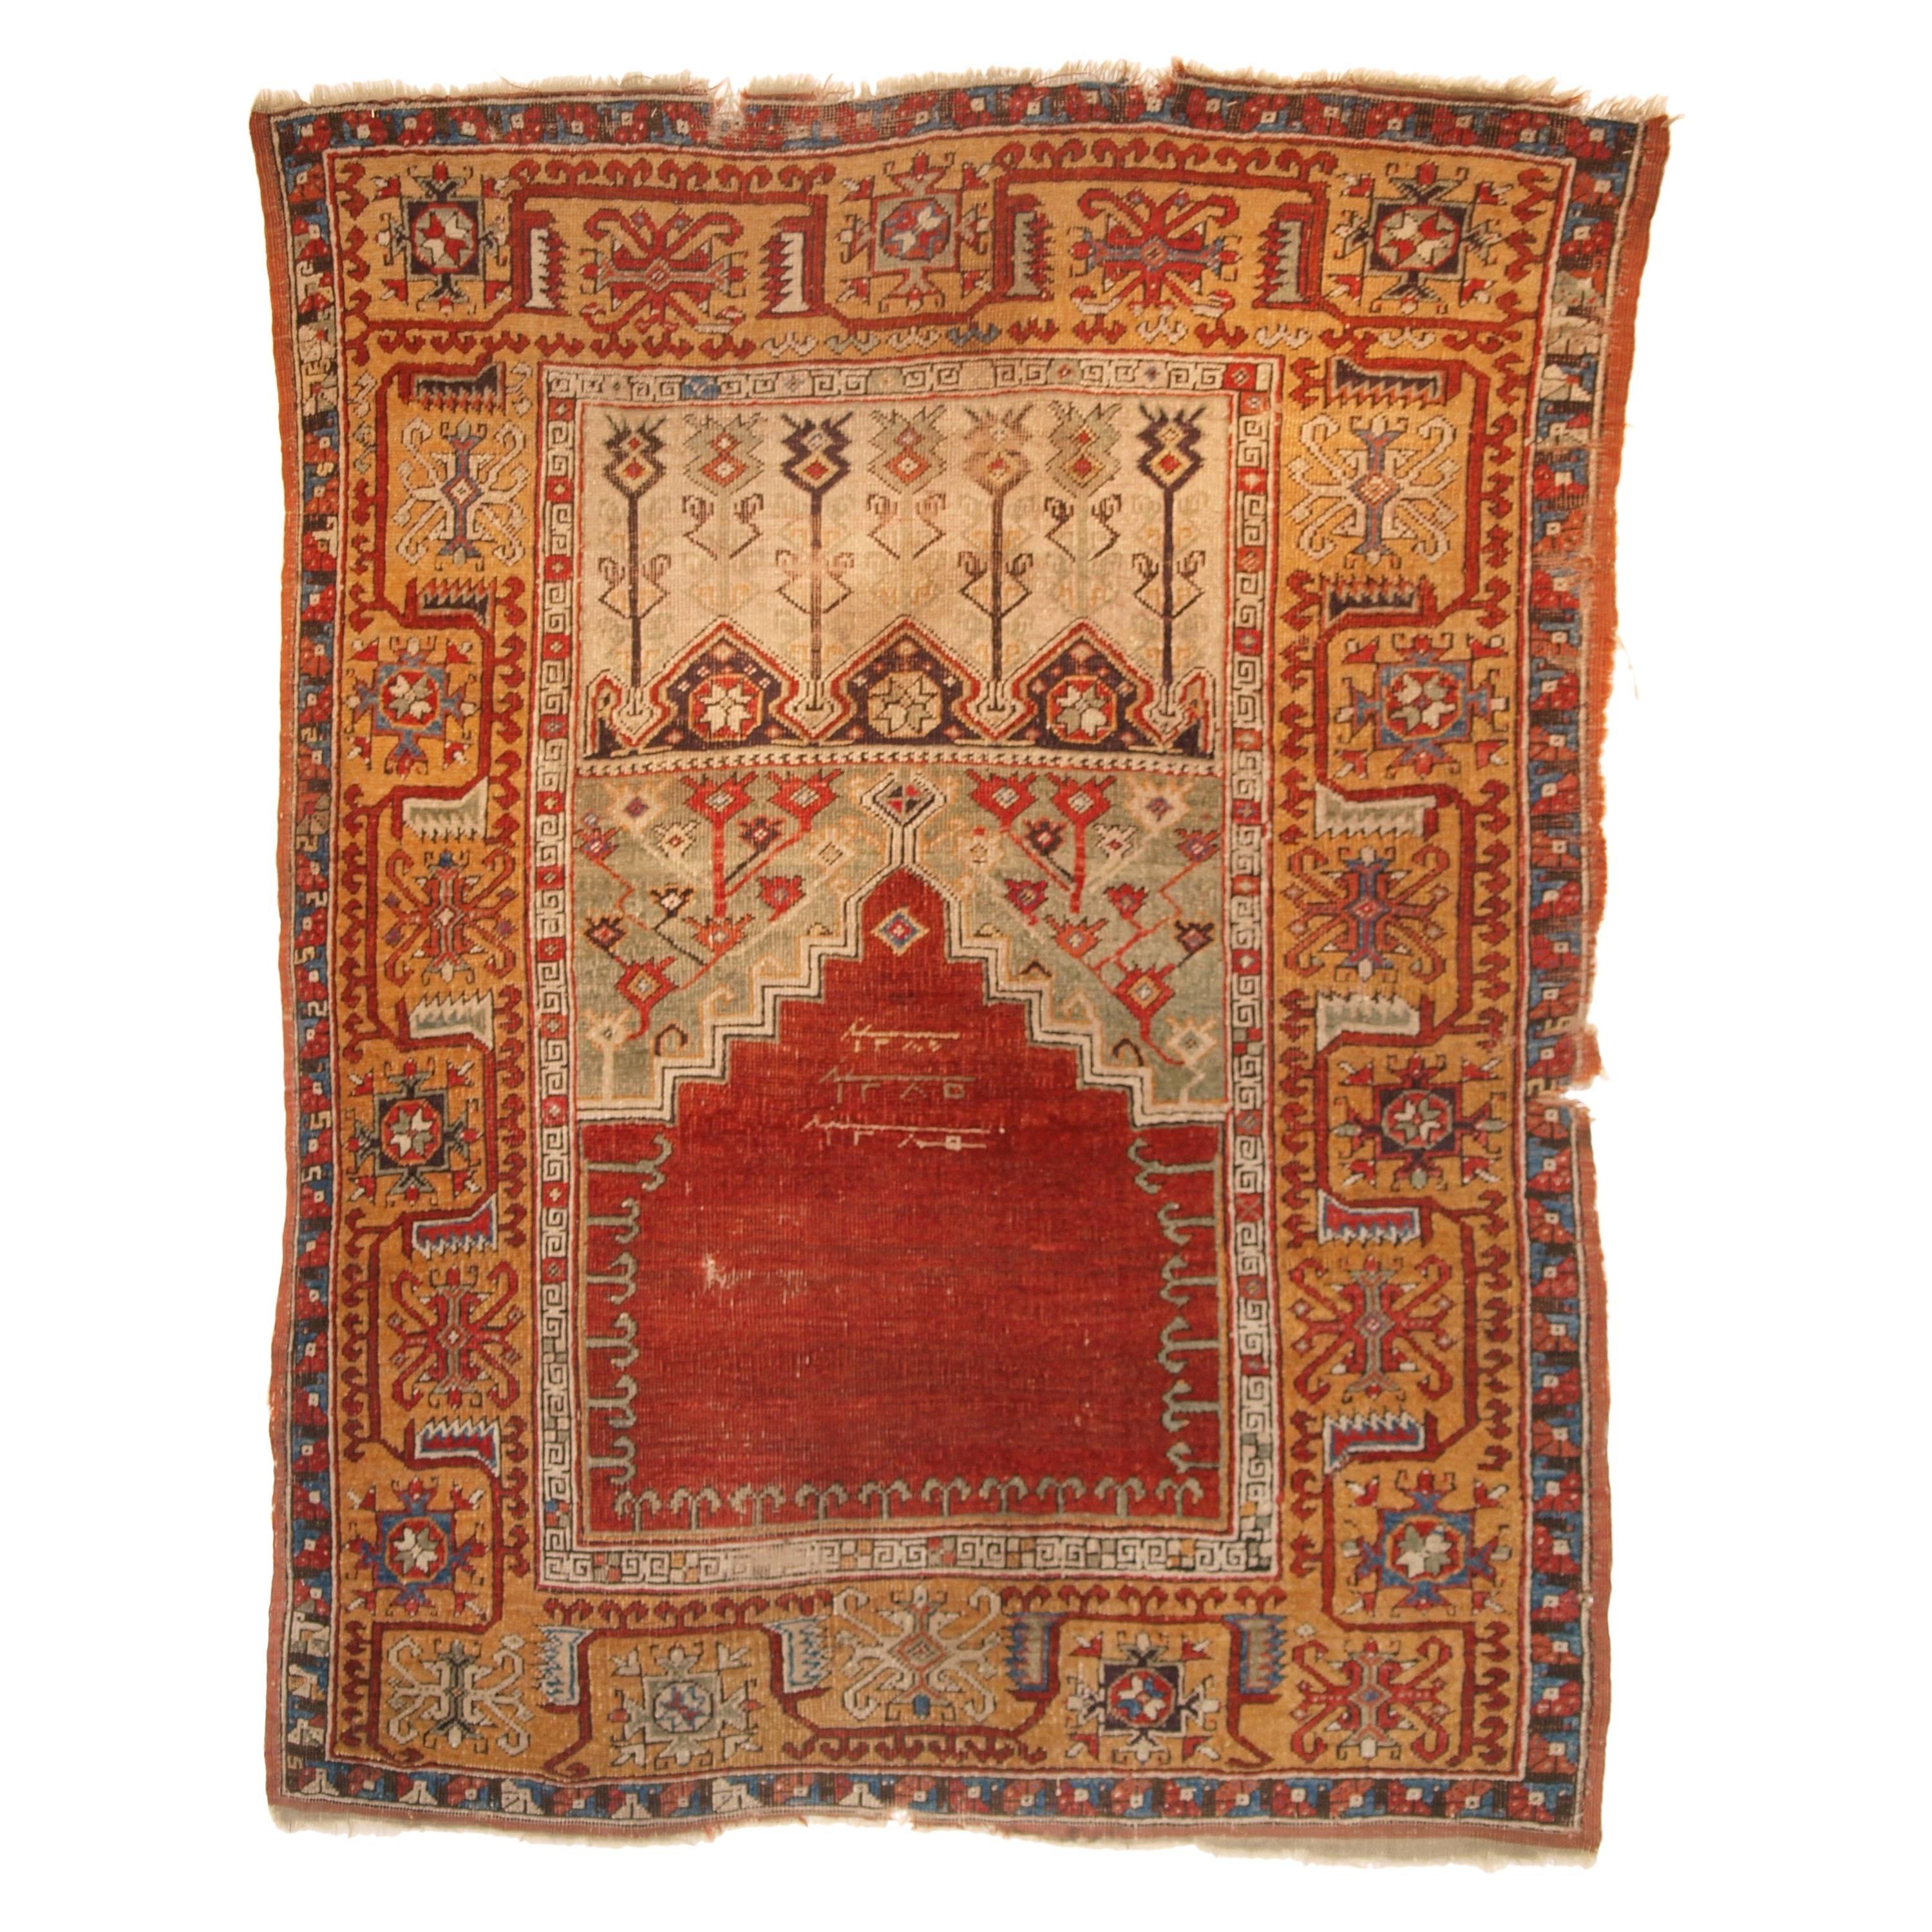 Antique Turkish Ladik Prayer Rug, a Superb Early Dated Example